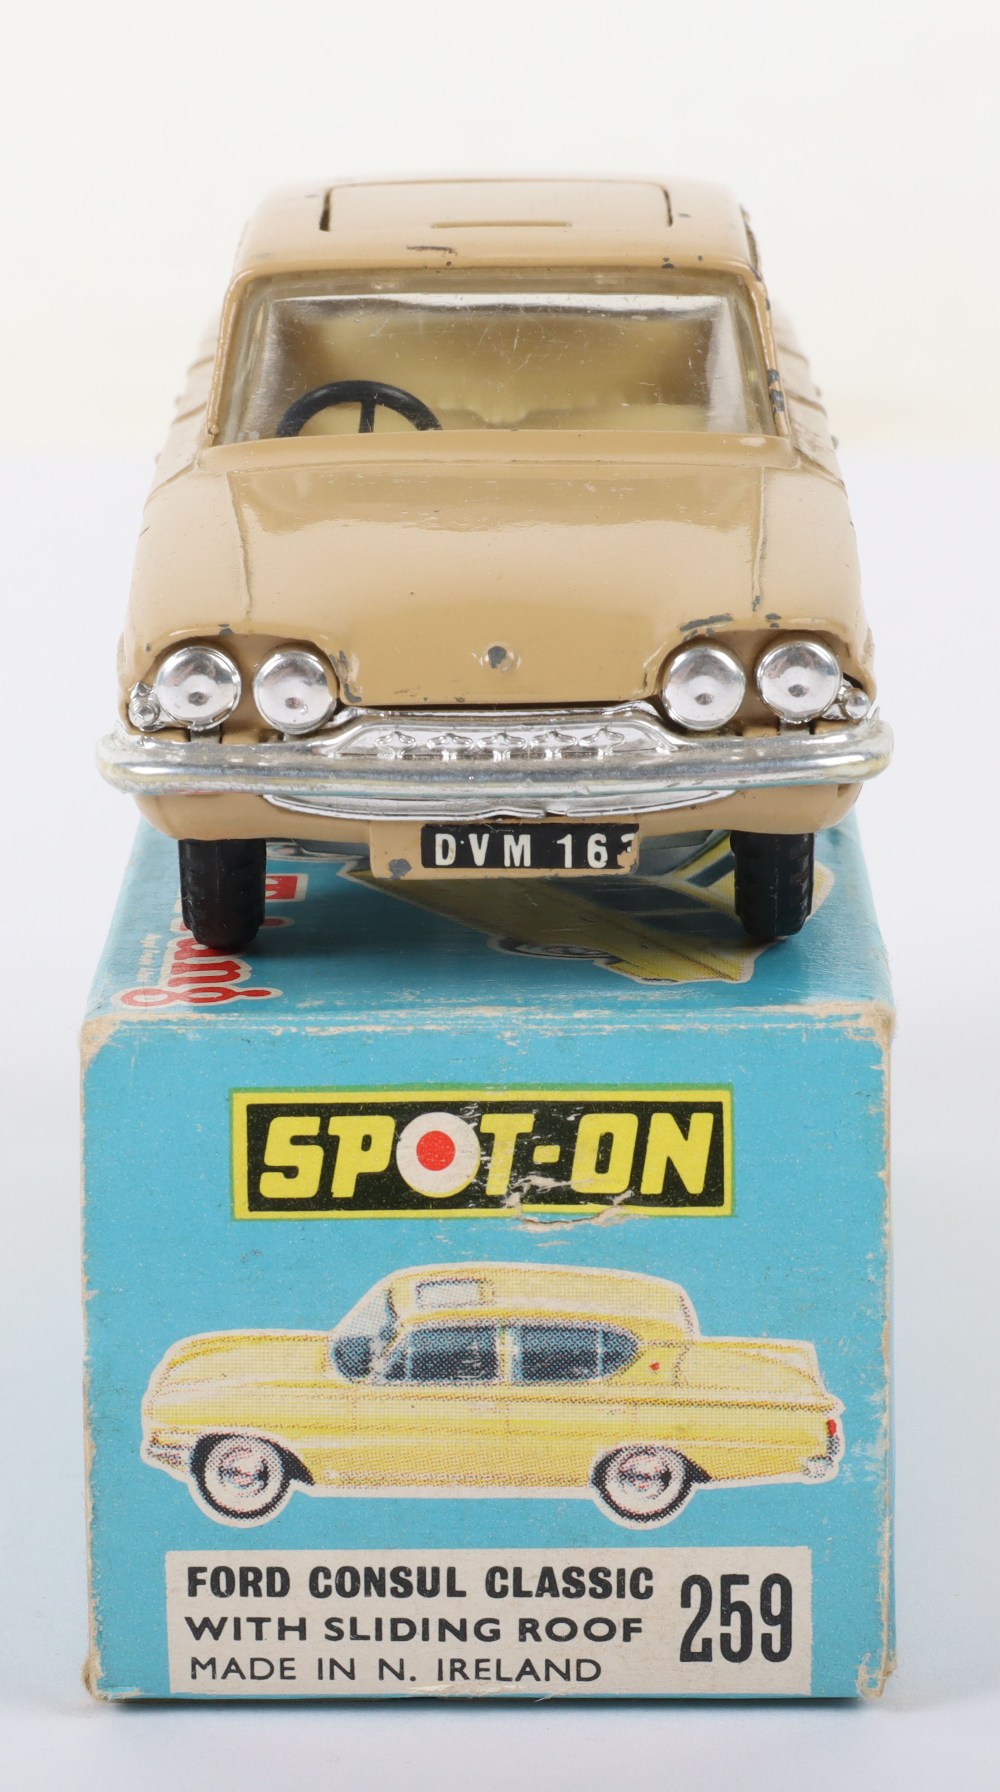 Tri-ang Spot On Model 259 Ford Consul Classic - Image 6 of 7